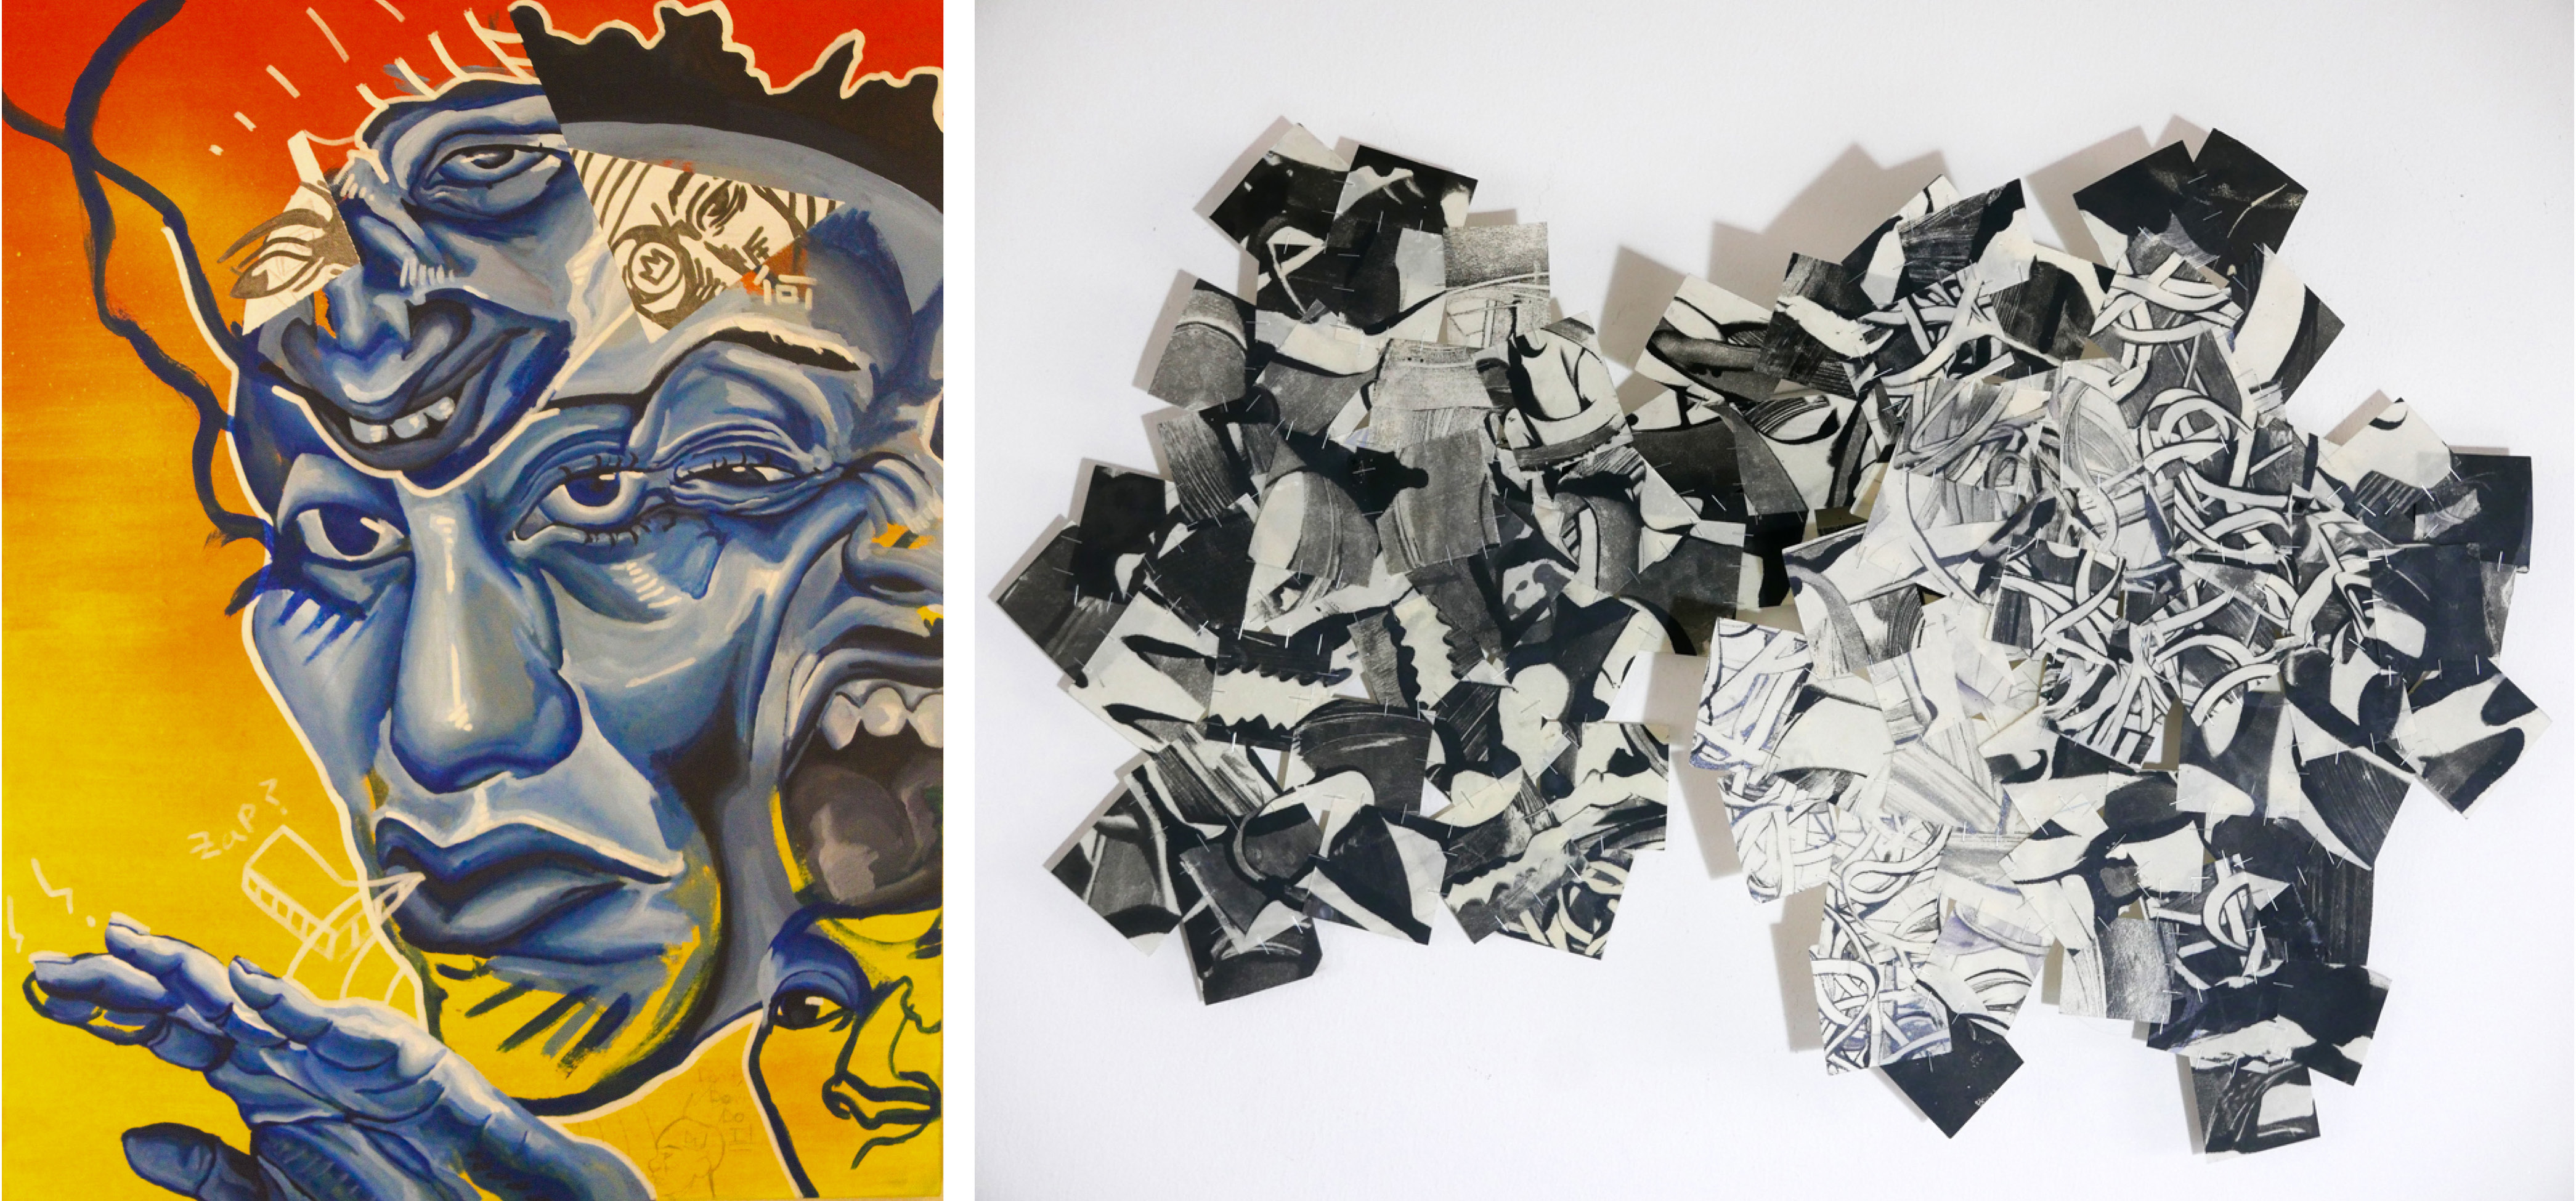 Header image for Trotter Alexander and Michele Thrane exhibition, featuring "When The Blue People Come" by Alexander on the left and "Axion Clouds #2" by Michele Thrane